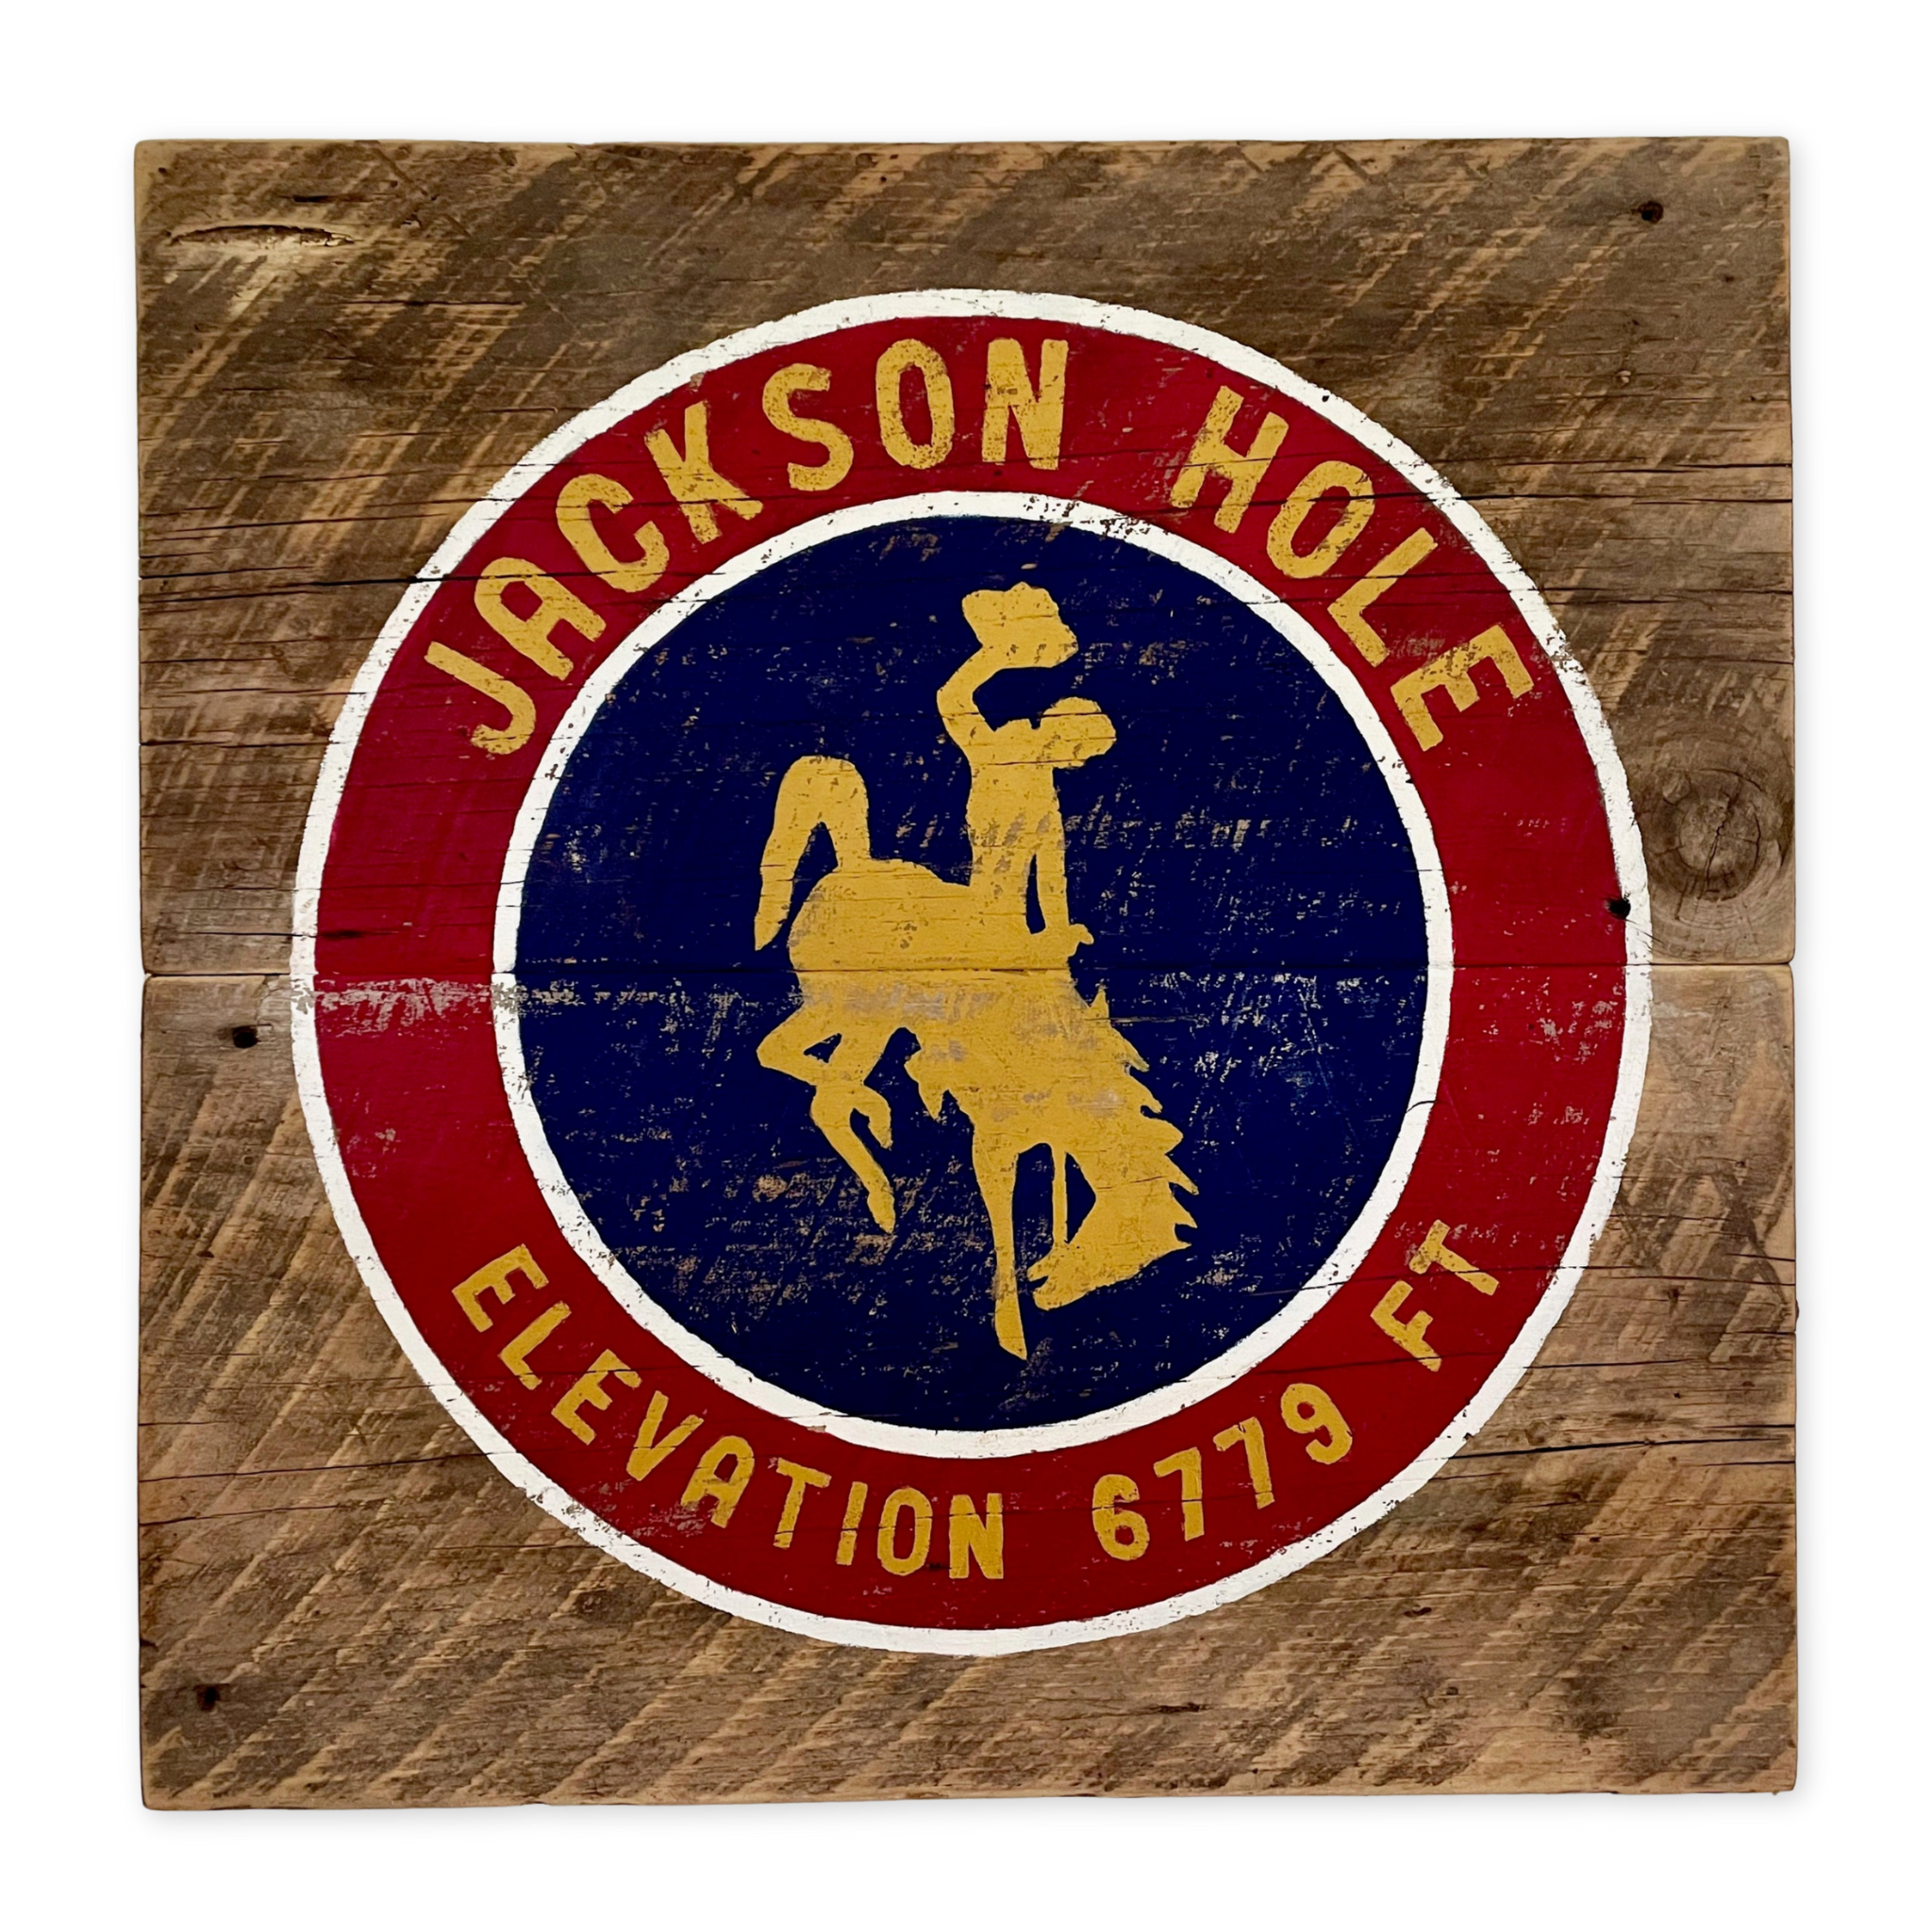 wooden sign with an image of the wyoming bucking bronco and jackson hole printed on it